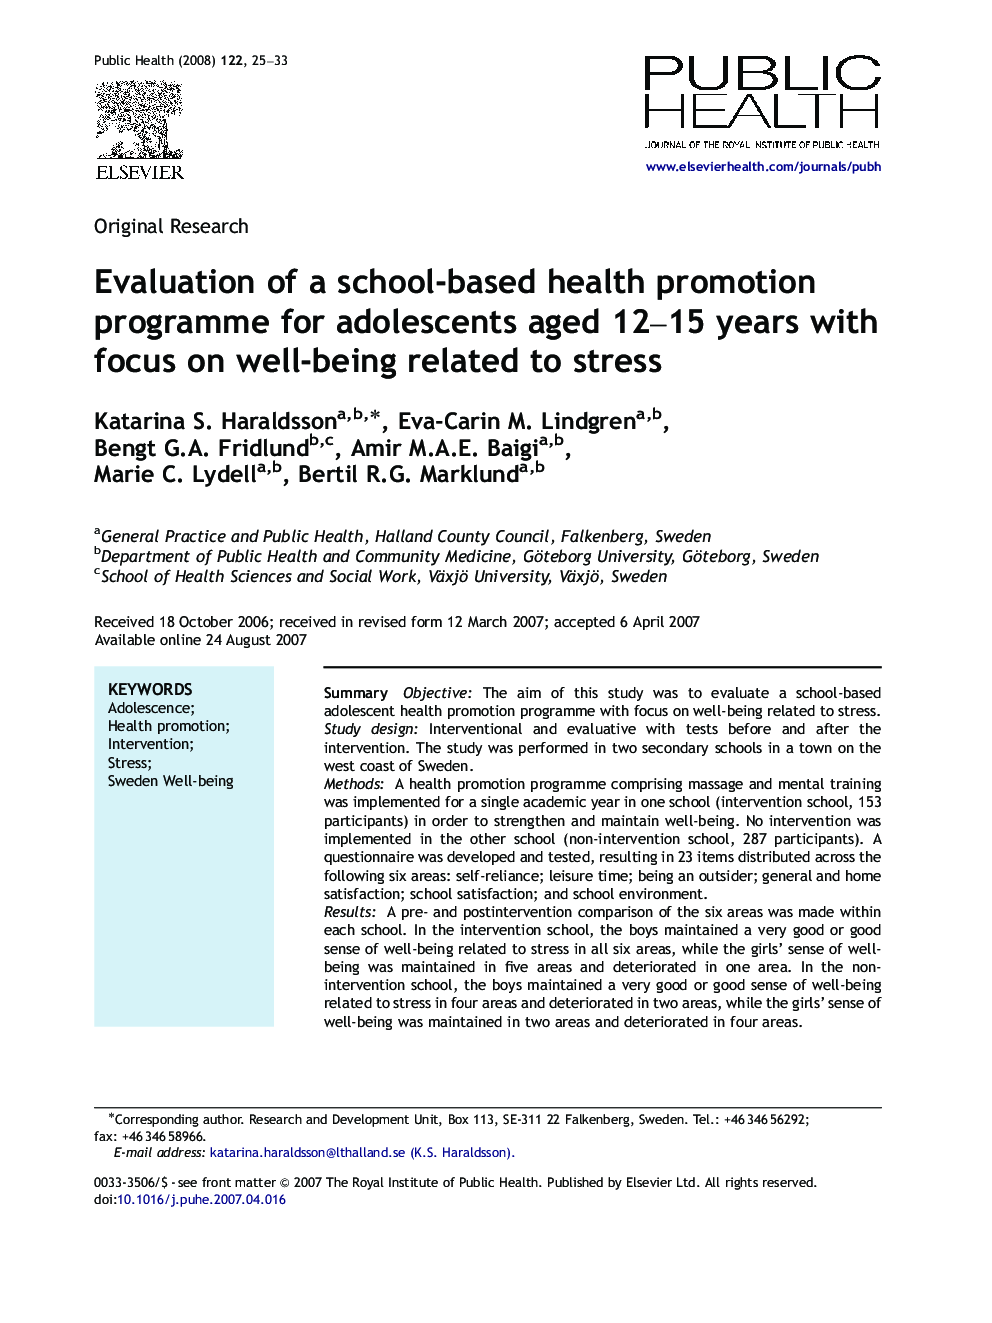 Evaluation of a school-based health promotion programme for adolescents aged 12–15 years with focus on well-being related to stress